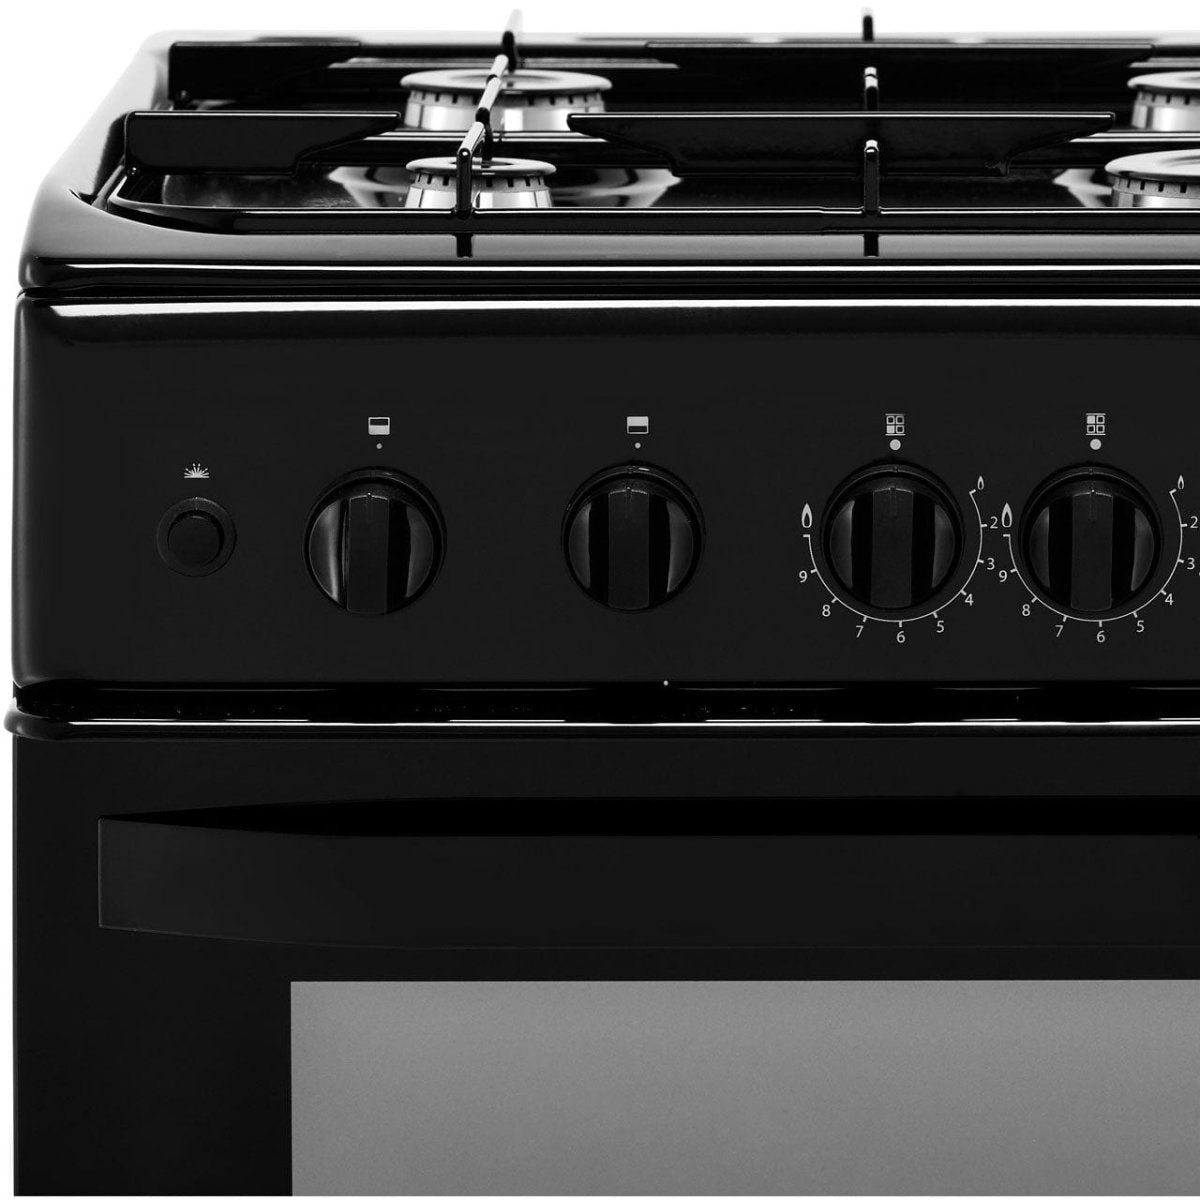 Hotpoint Cloe HD5G00KCW 50cm Gas Cooker with Full Width Gas Grill - White - Atlantic Electrics